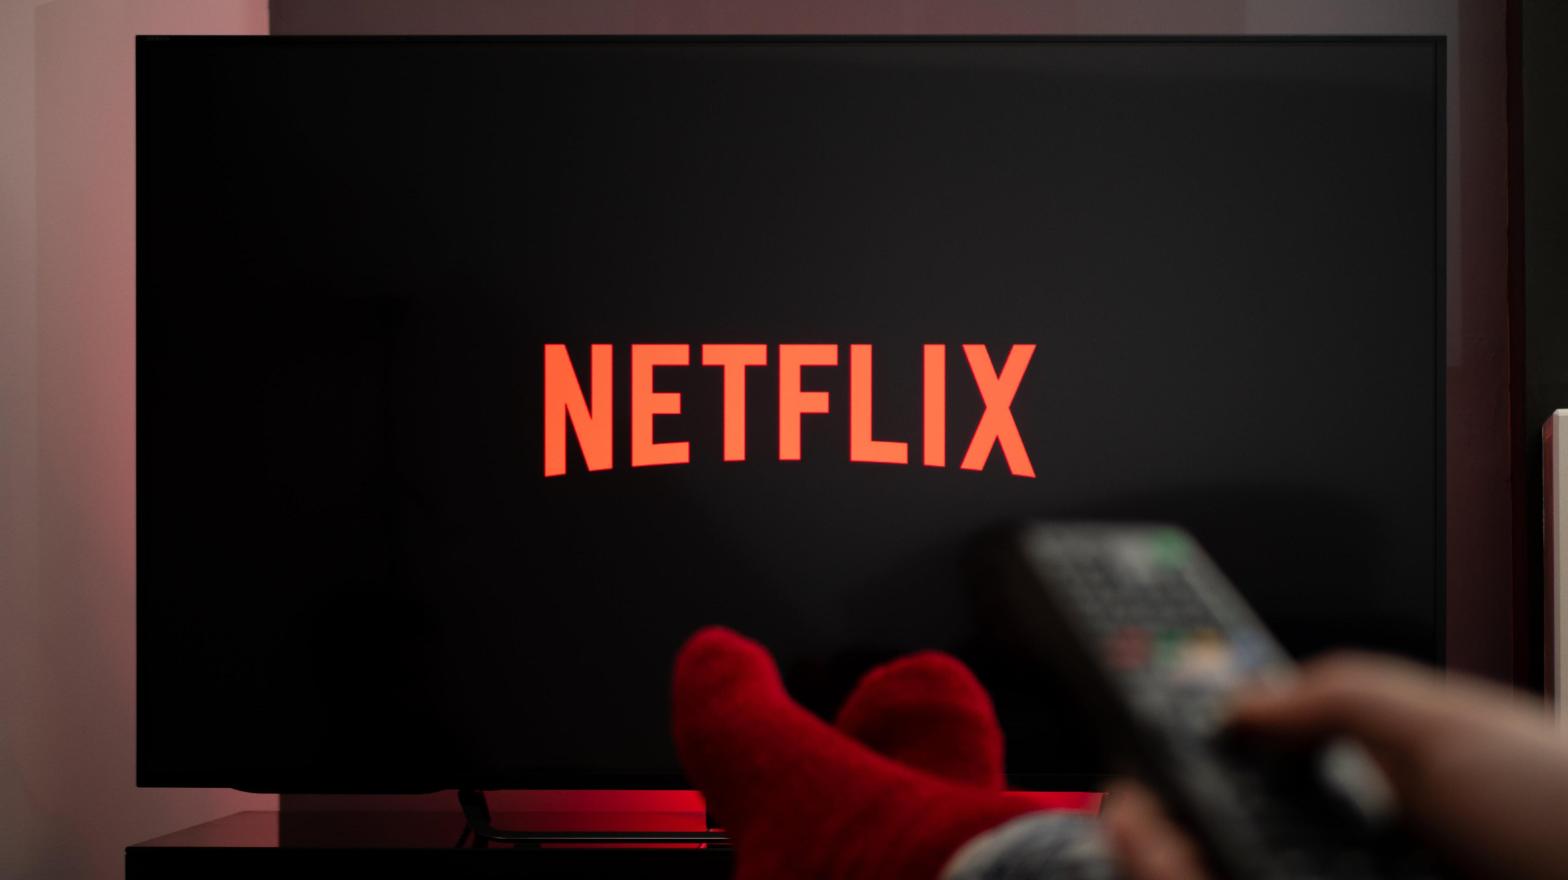 Netflix's lower priced subscriptions will affect users in markets like Asia, Eastern Europe, Latin America, Africa, and the Middle East. (Image: Vantage_DS, Shutterstock)